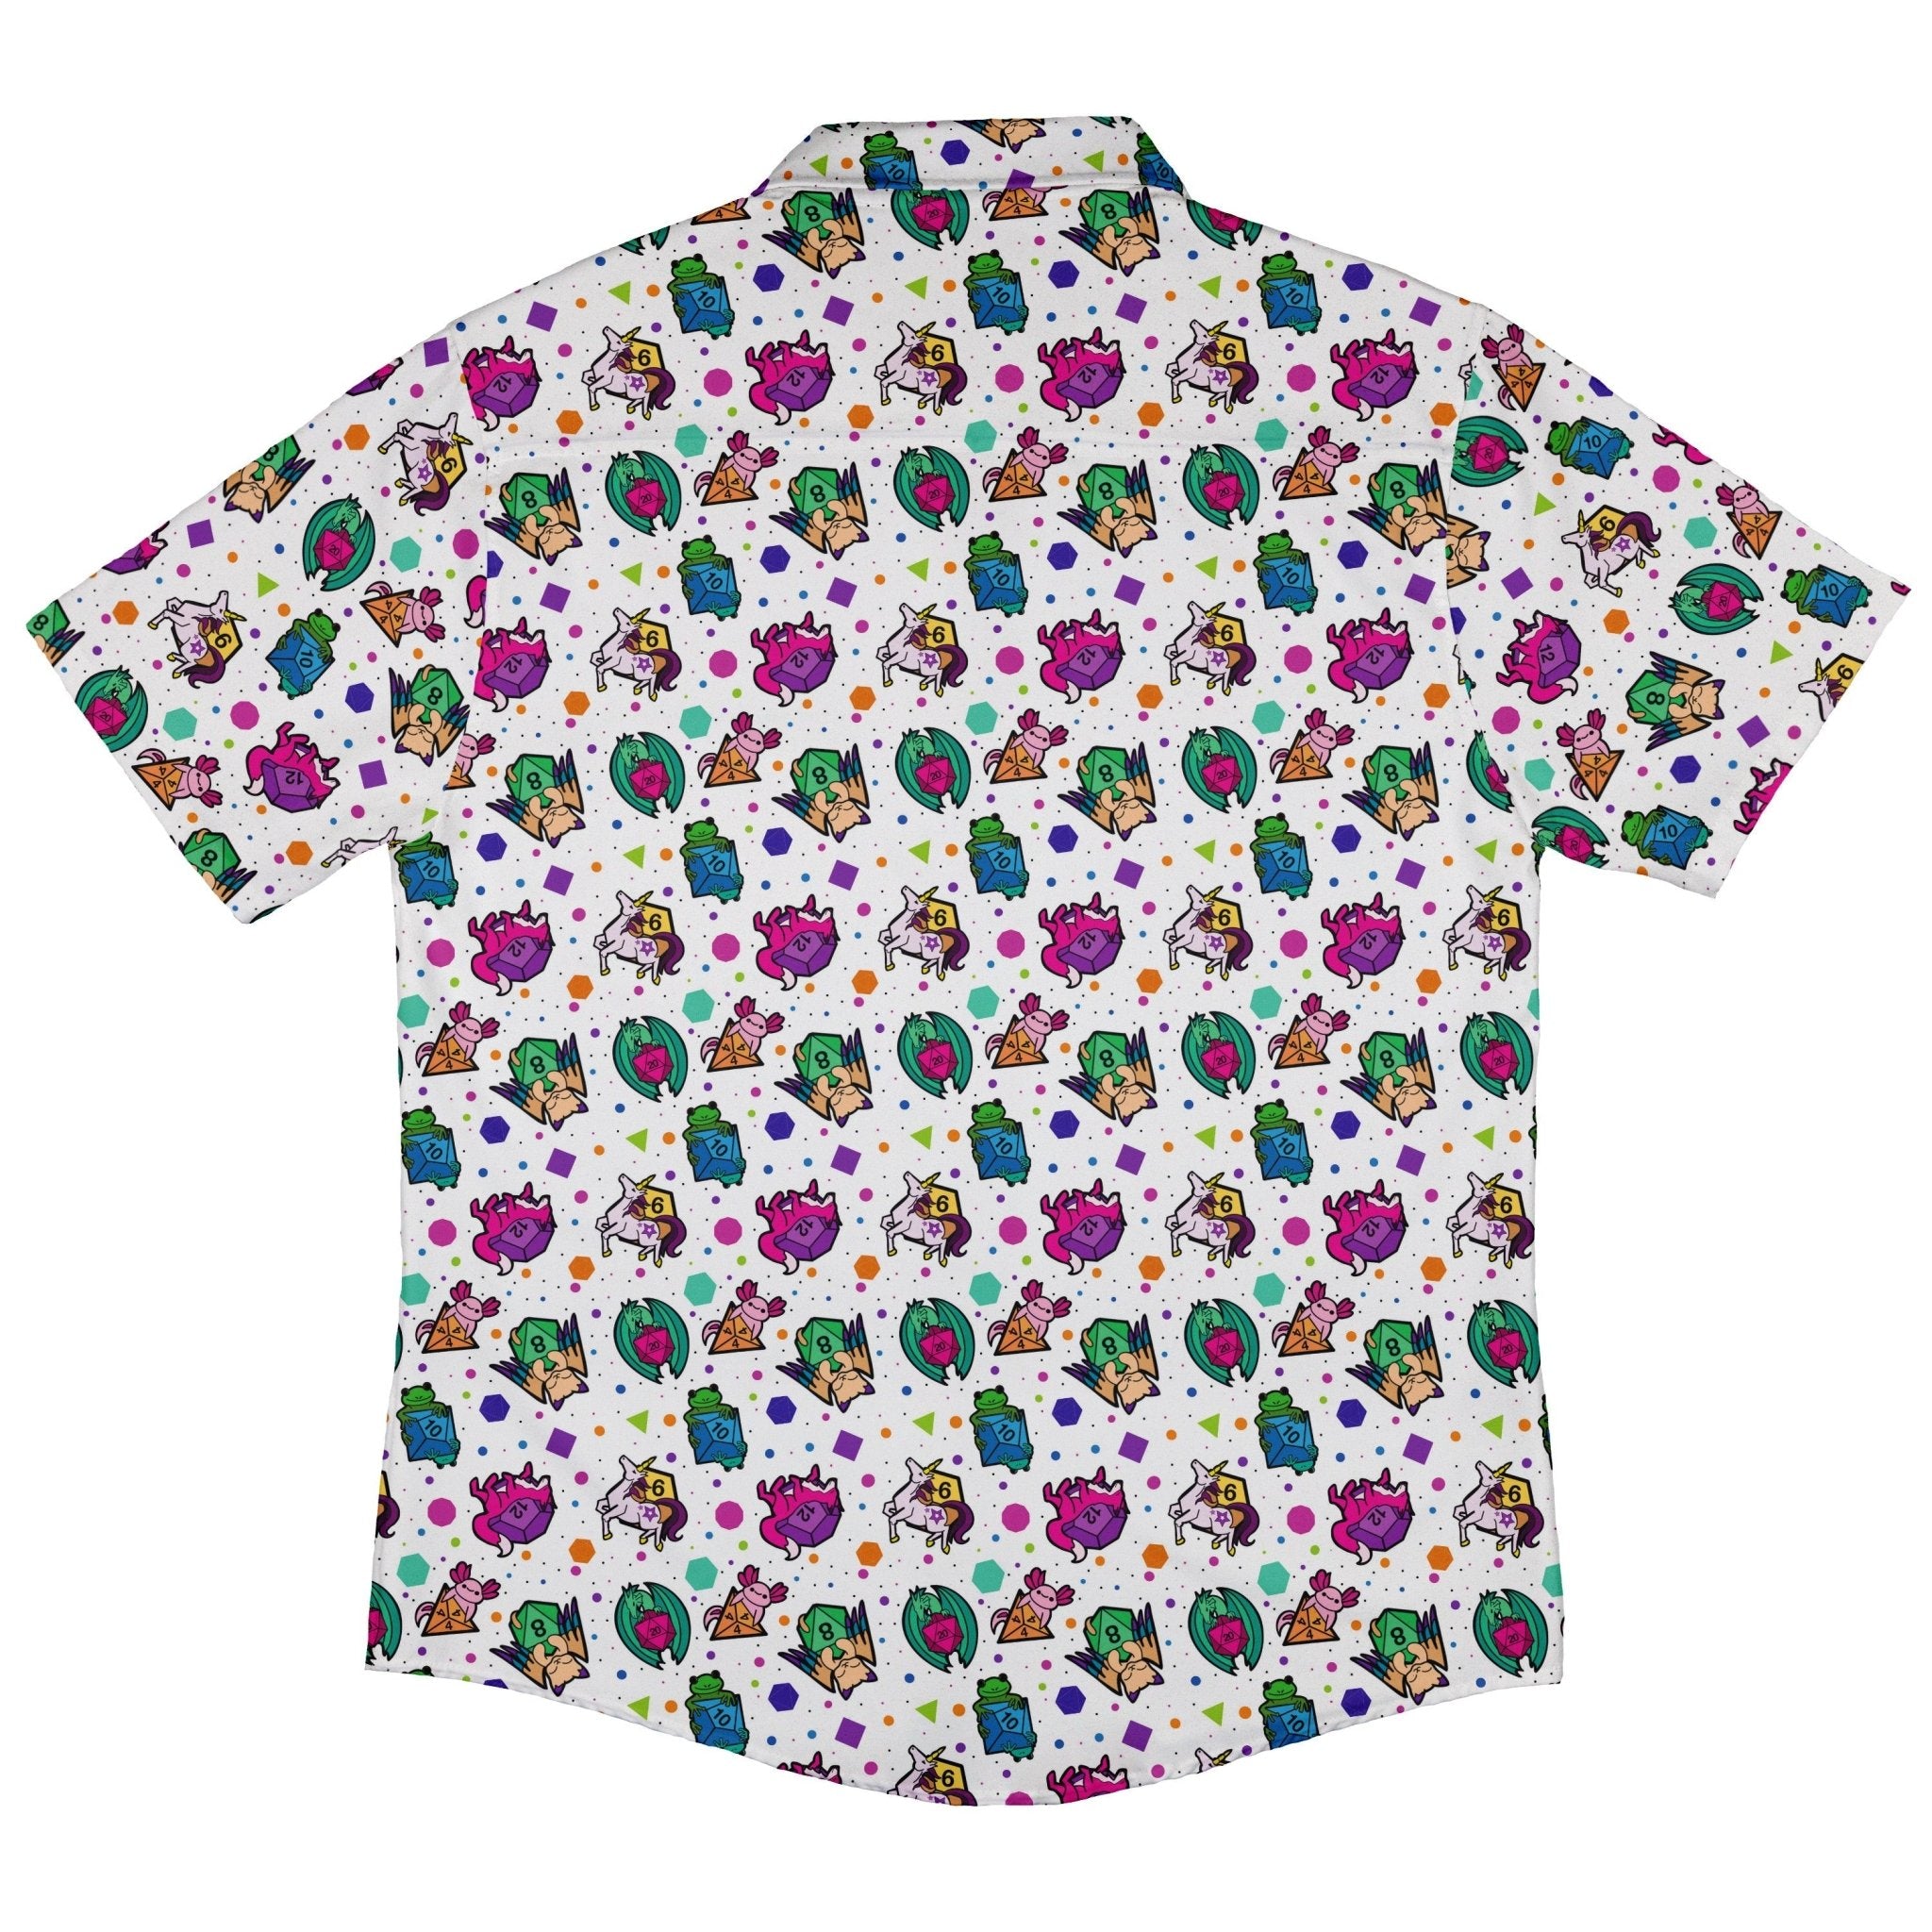 DND Dice Critters Colors Button Up Shirt - adult sizing - Animal Patterns - Designed by Rose Khan